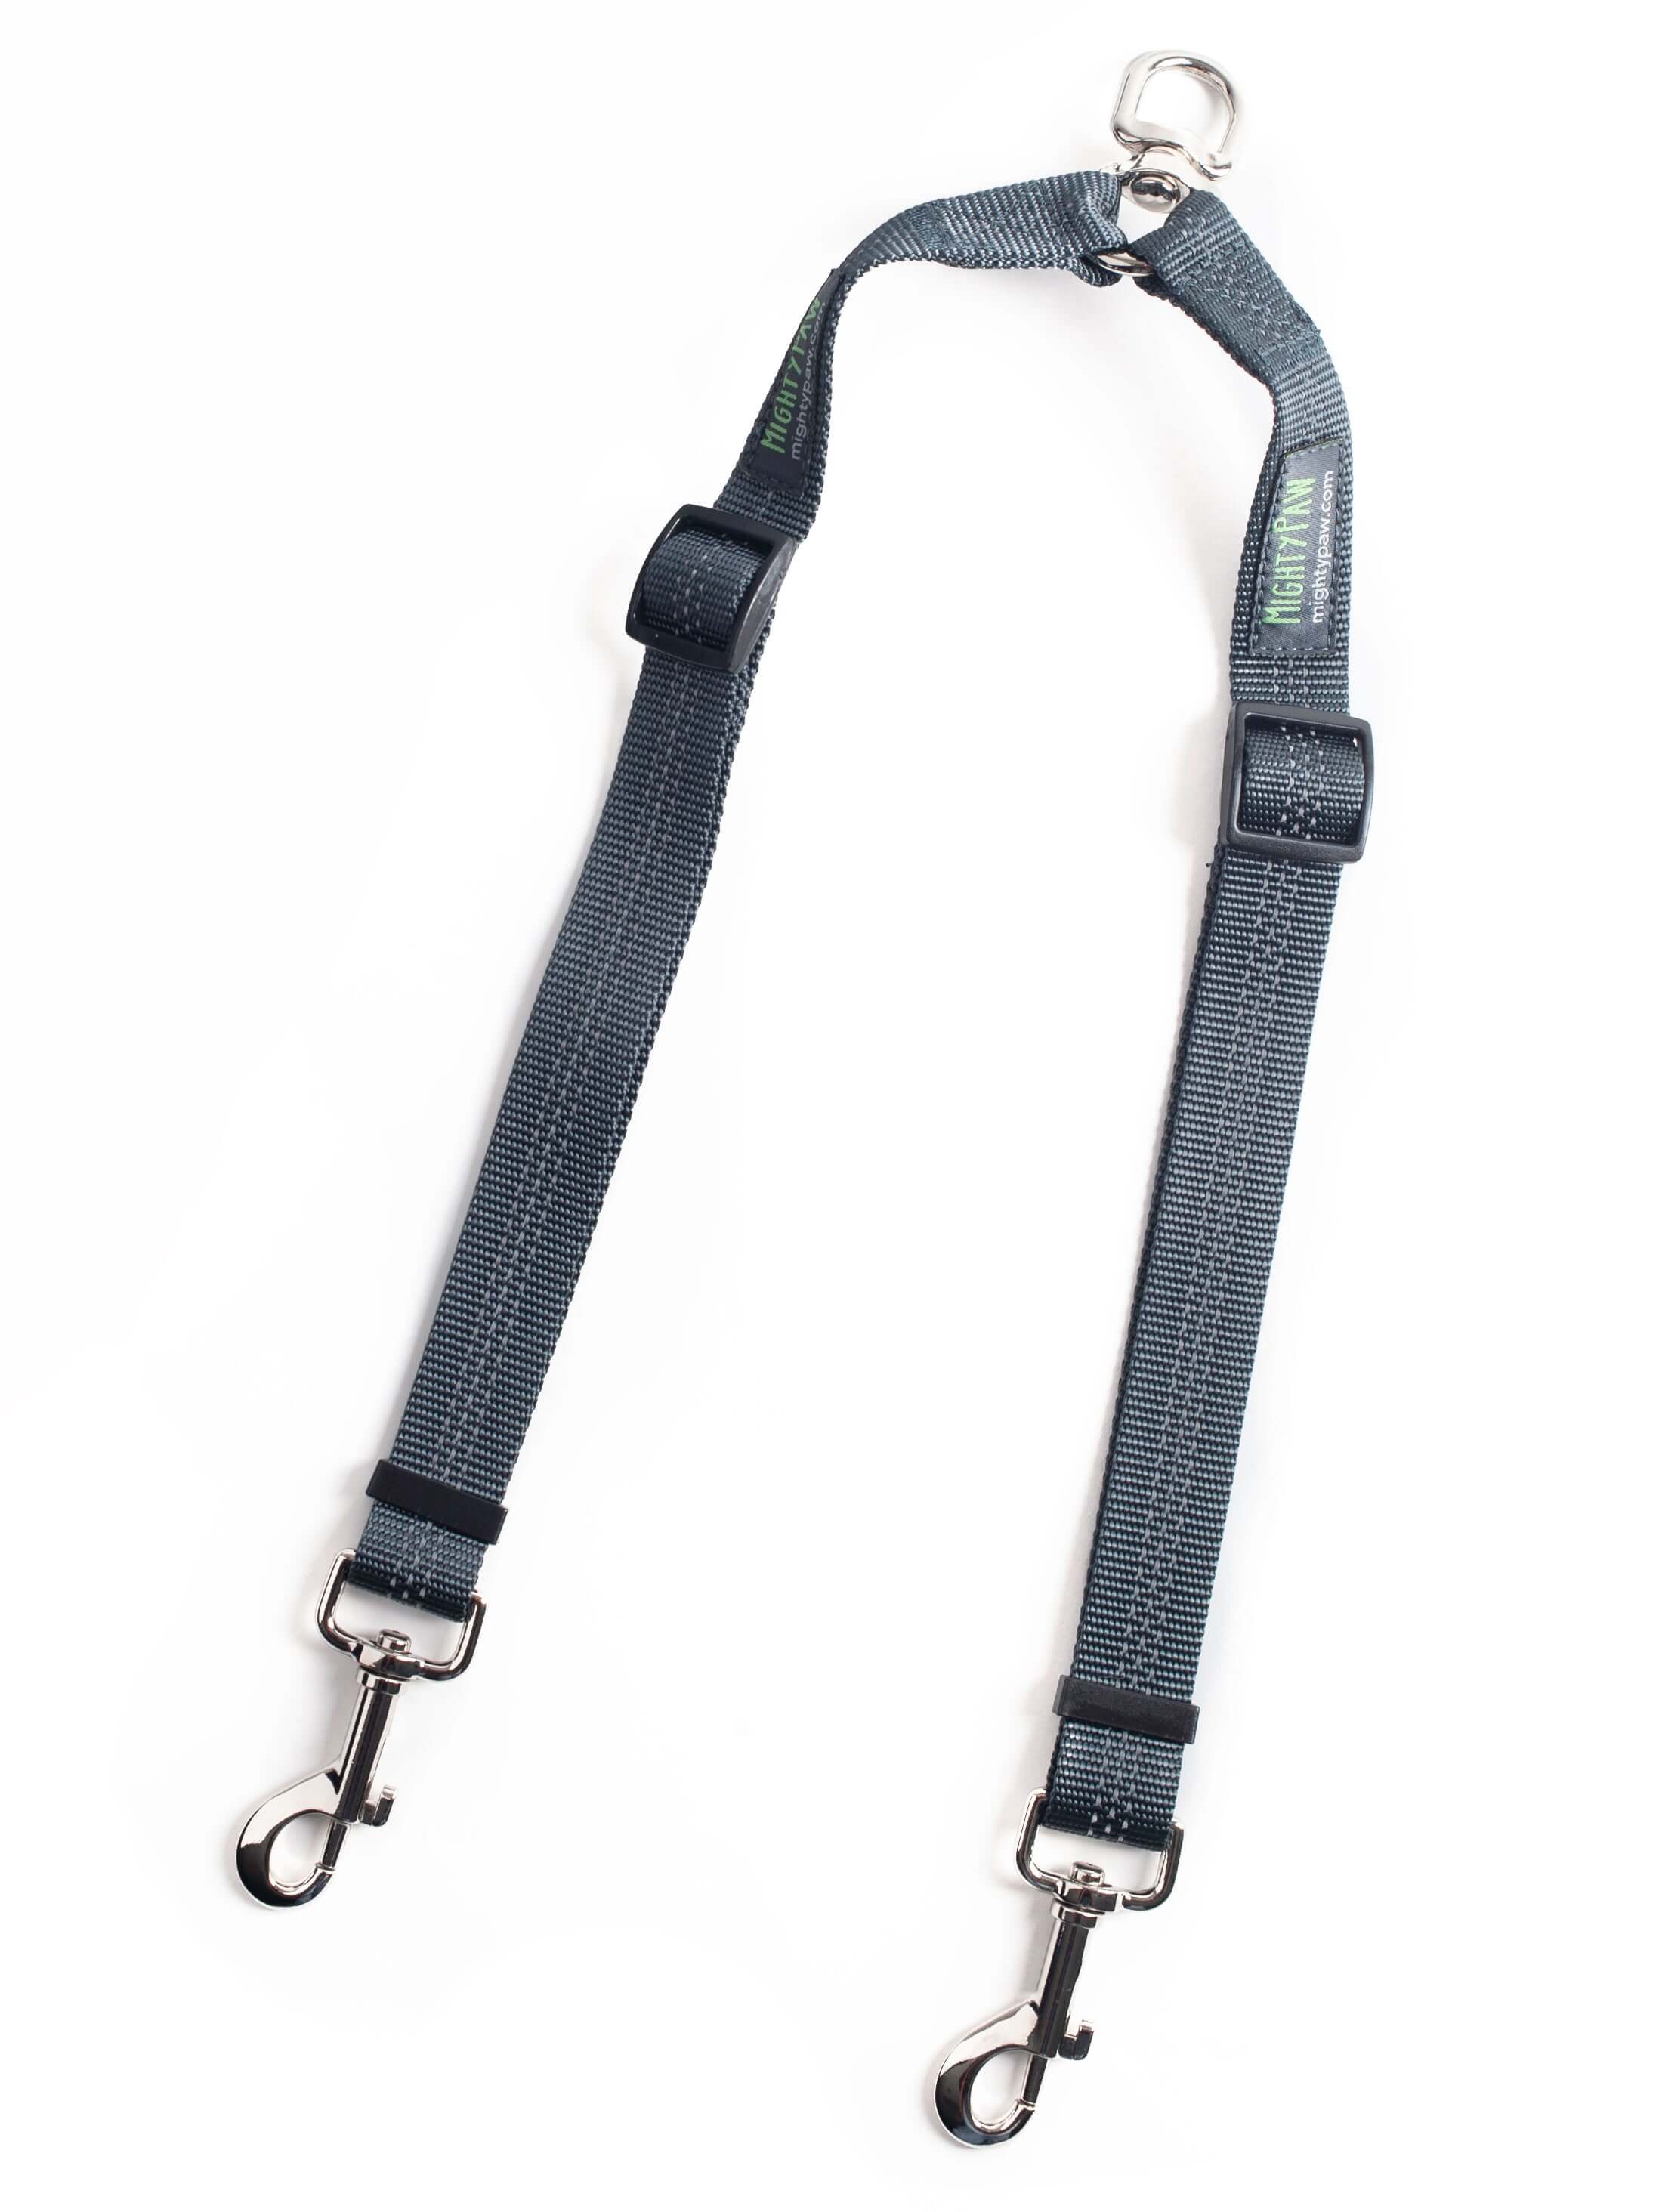 Mighty Paw Adjustable Length Double Dog Leash in Gray